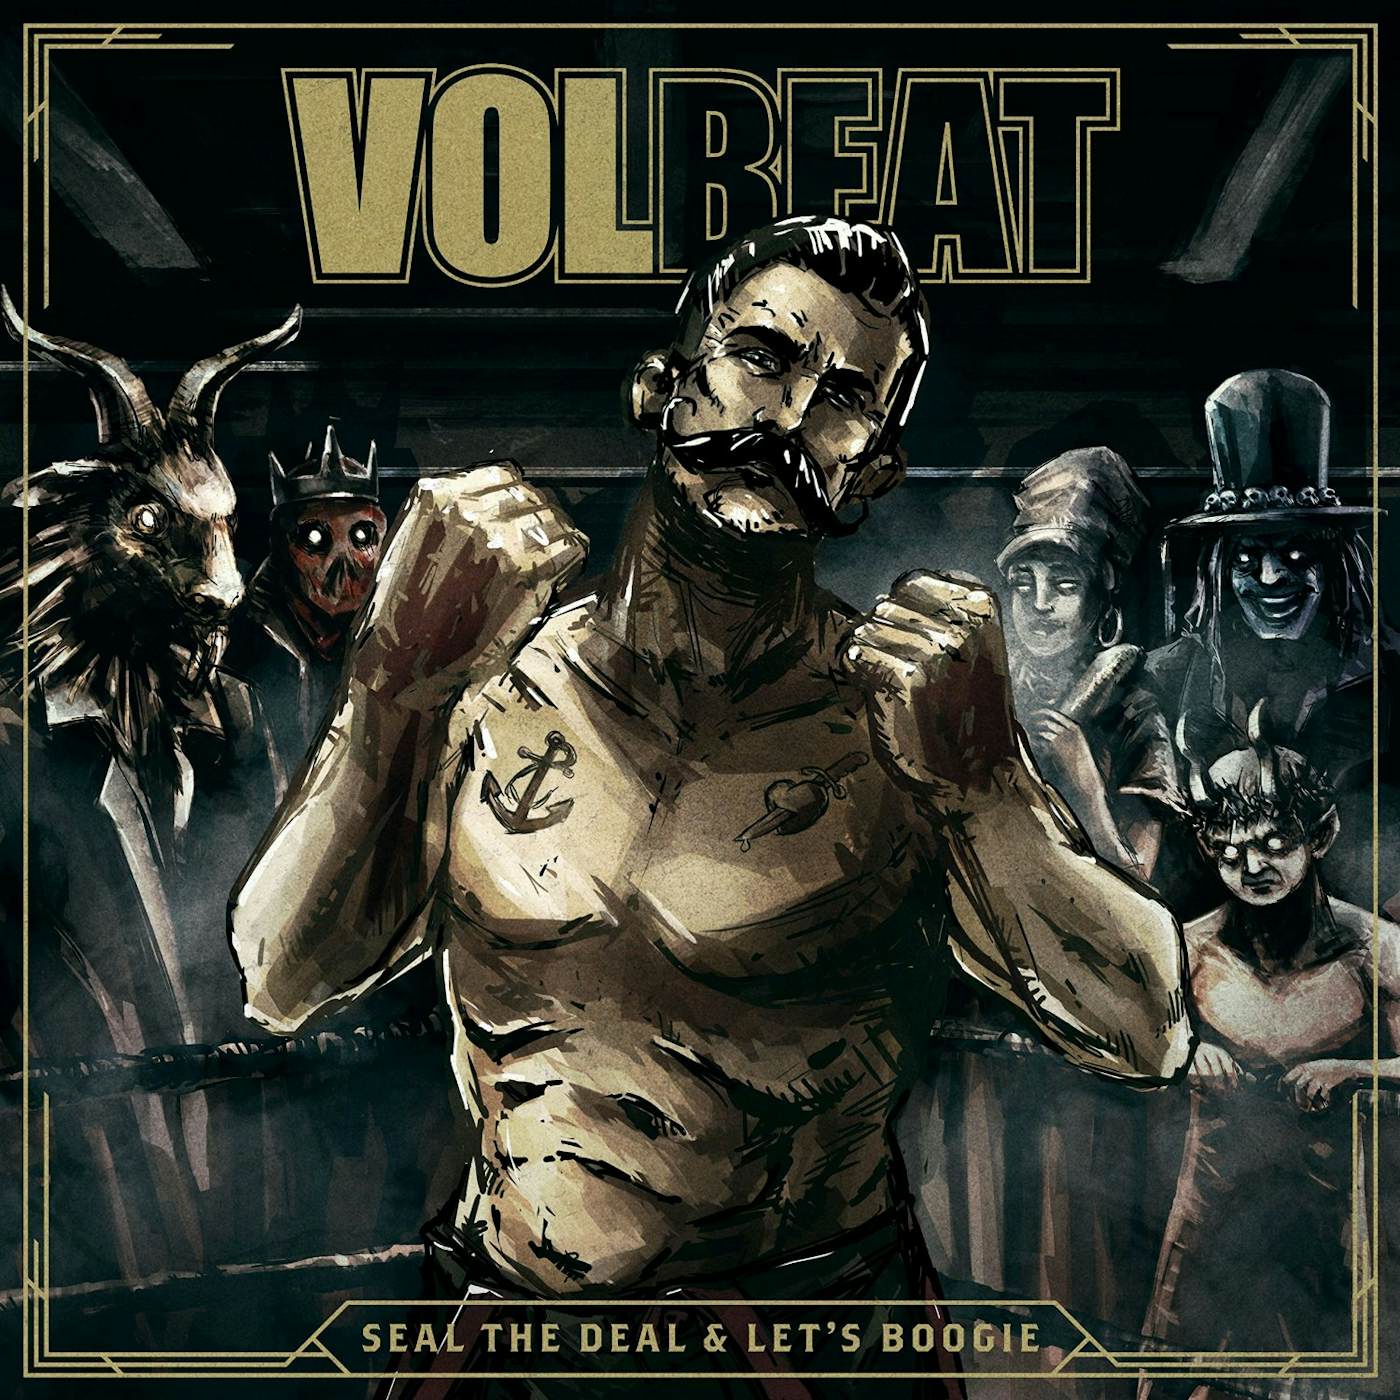 Volbeat SEAL THE DEAL & LET'S BOOGIE CD